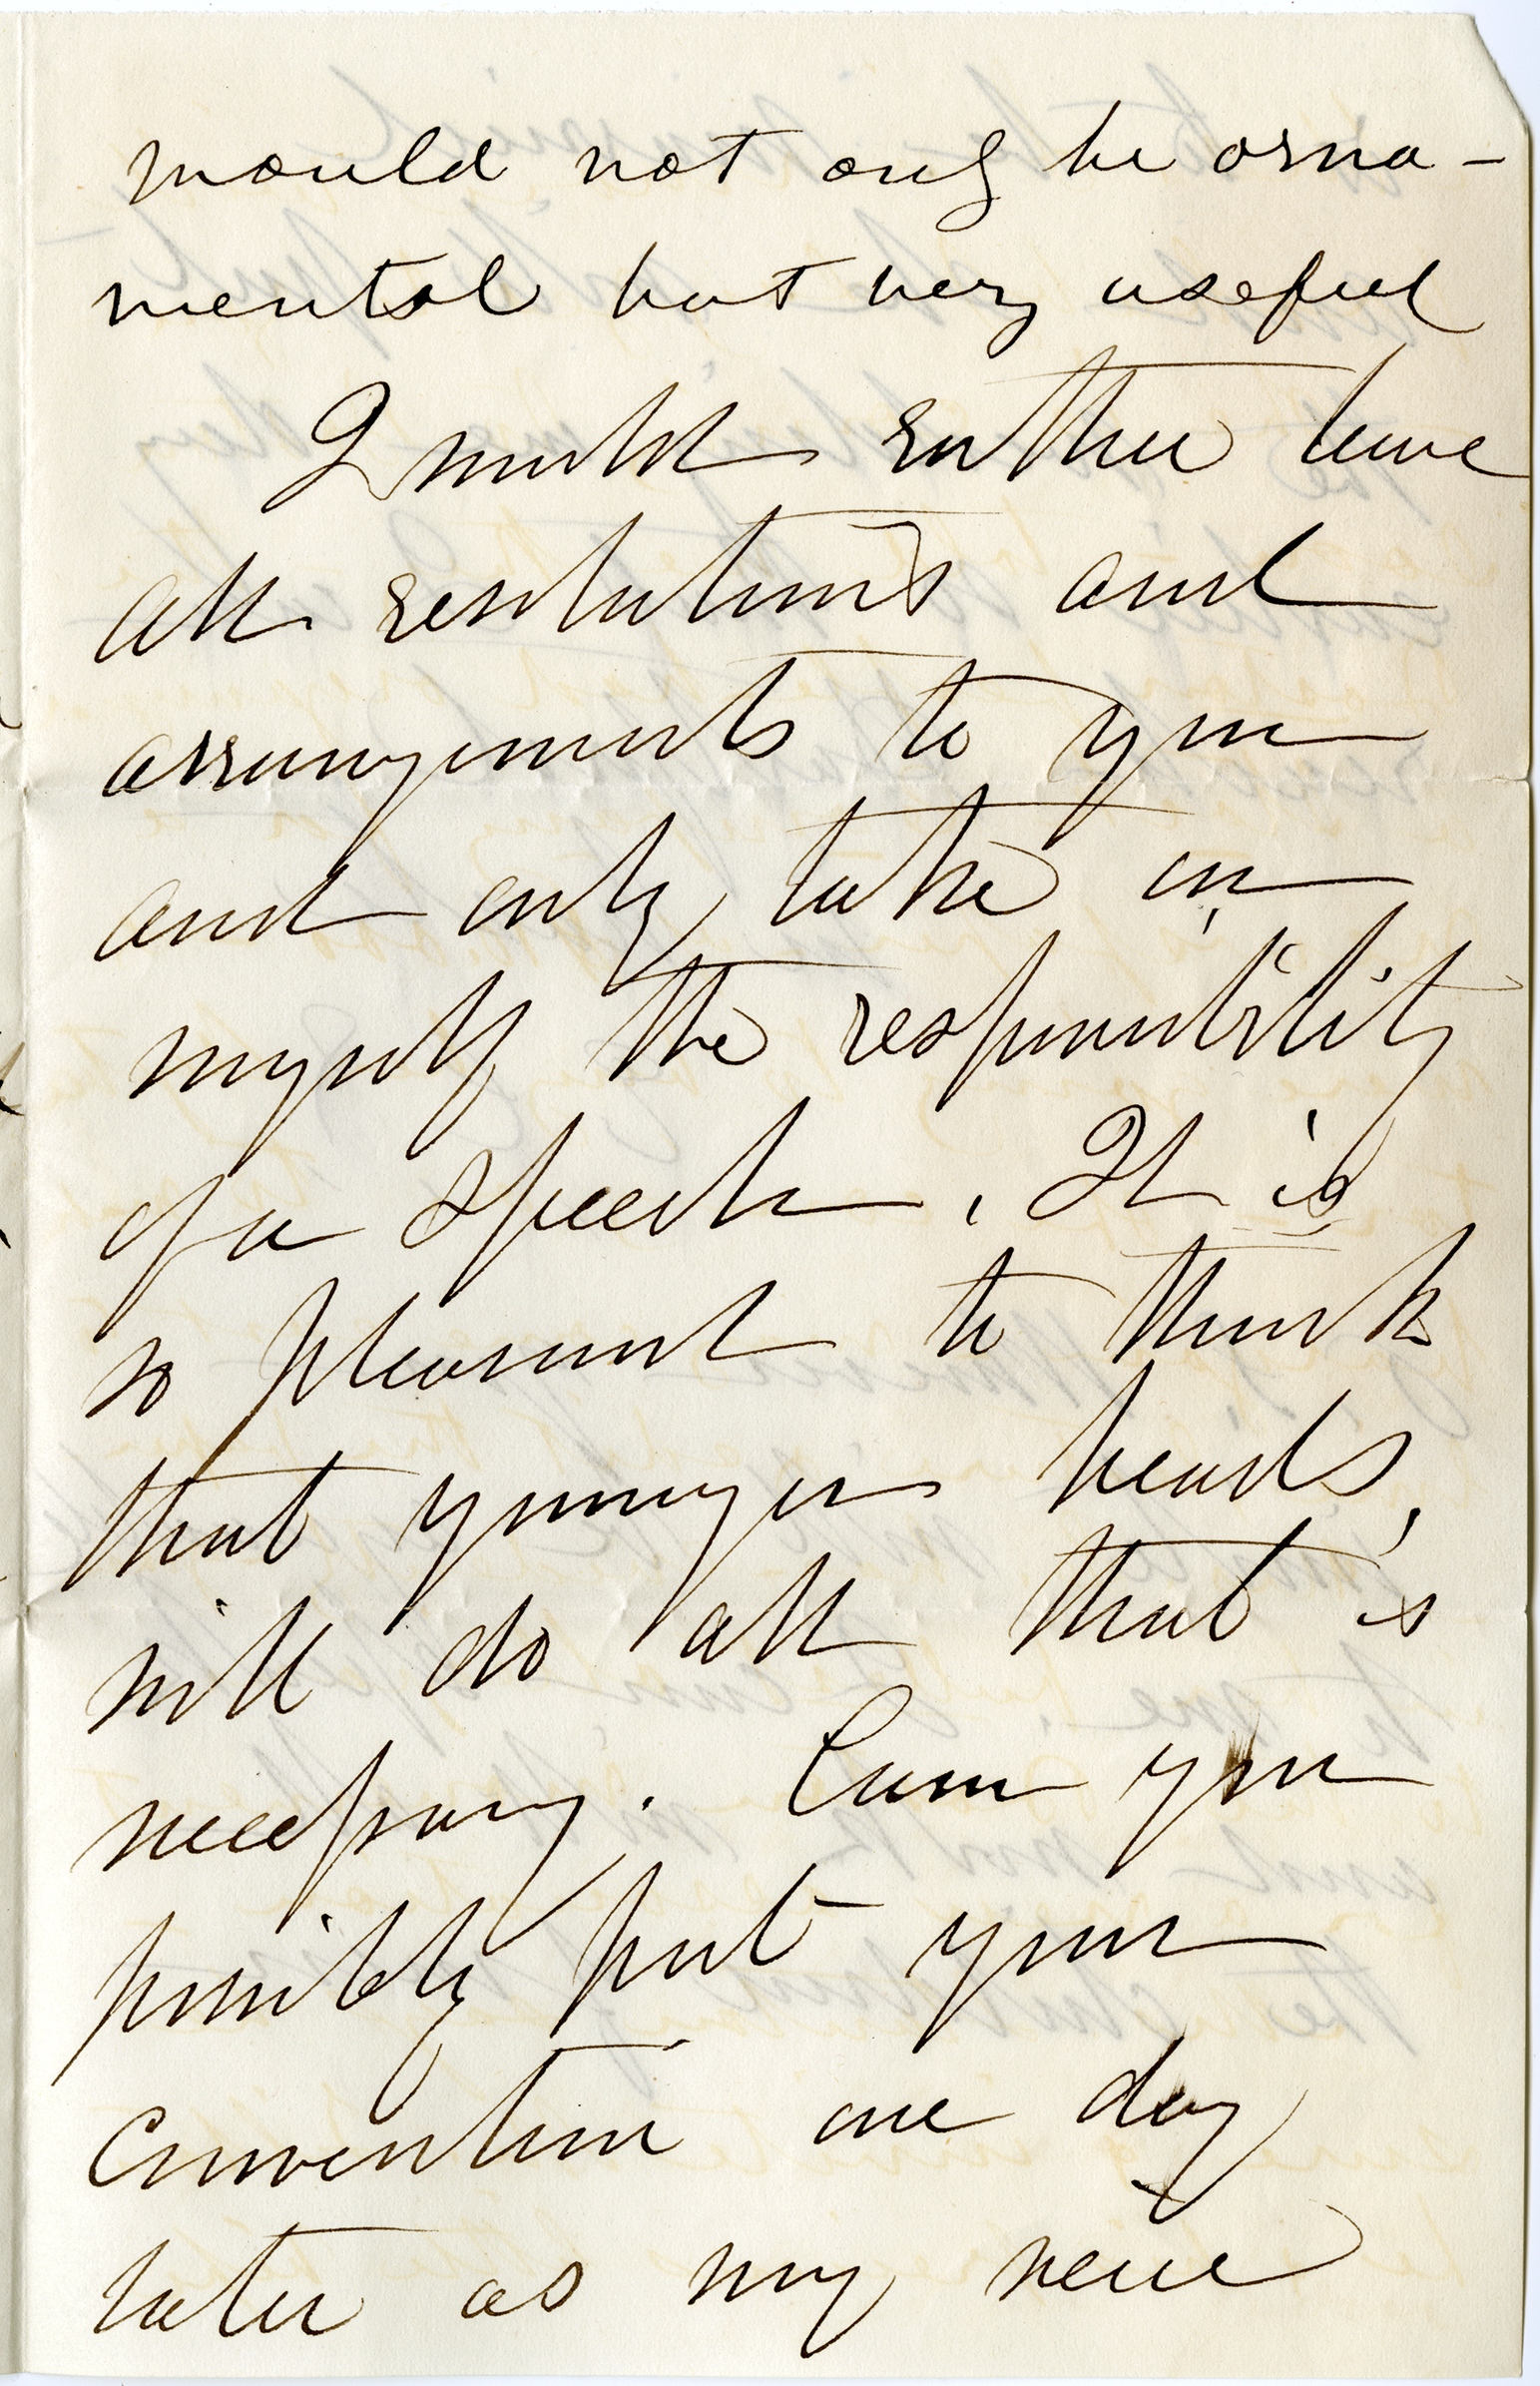 The 3rd page of a letter from Susan B. Anthony to Isabella Beecher Hooker